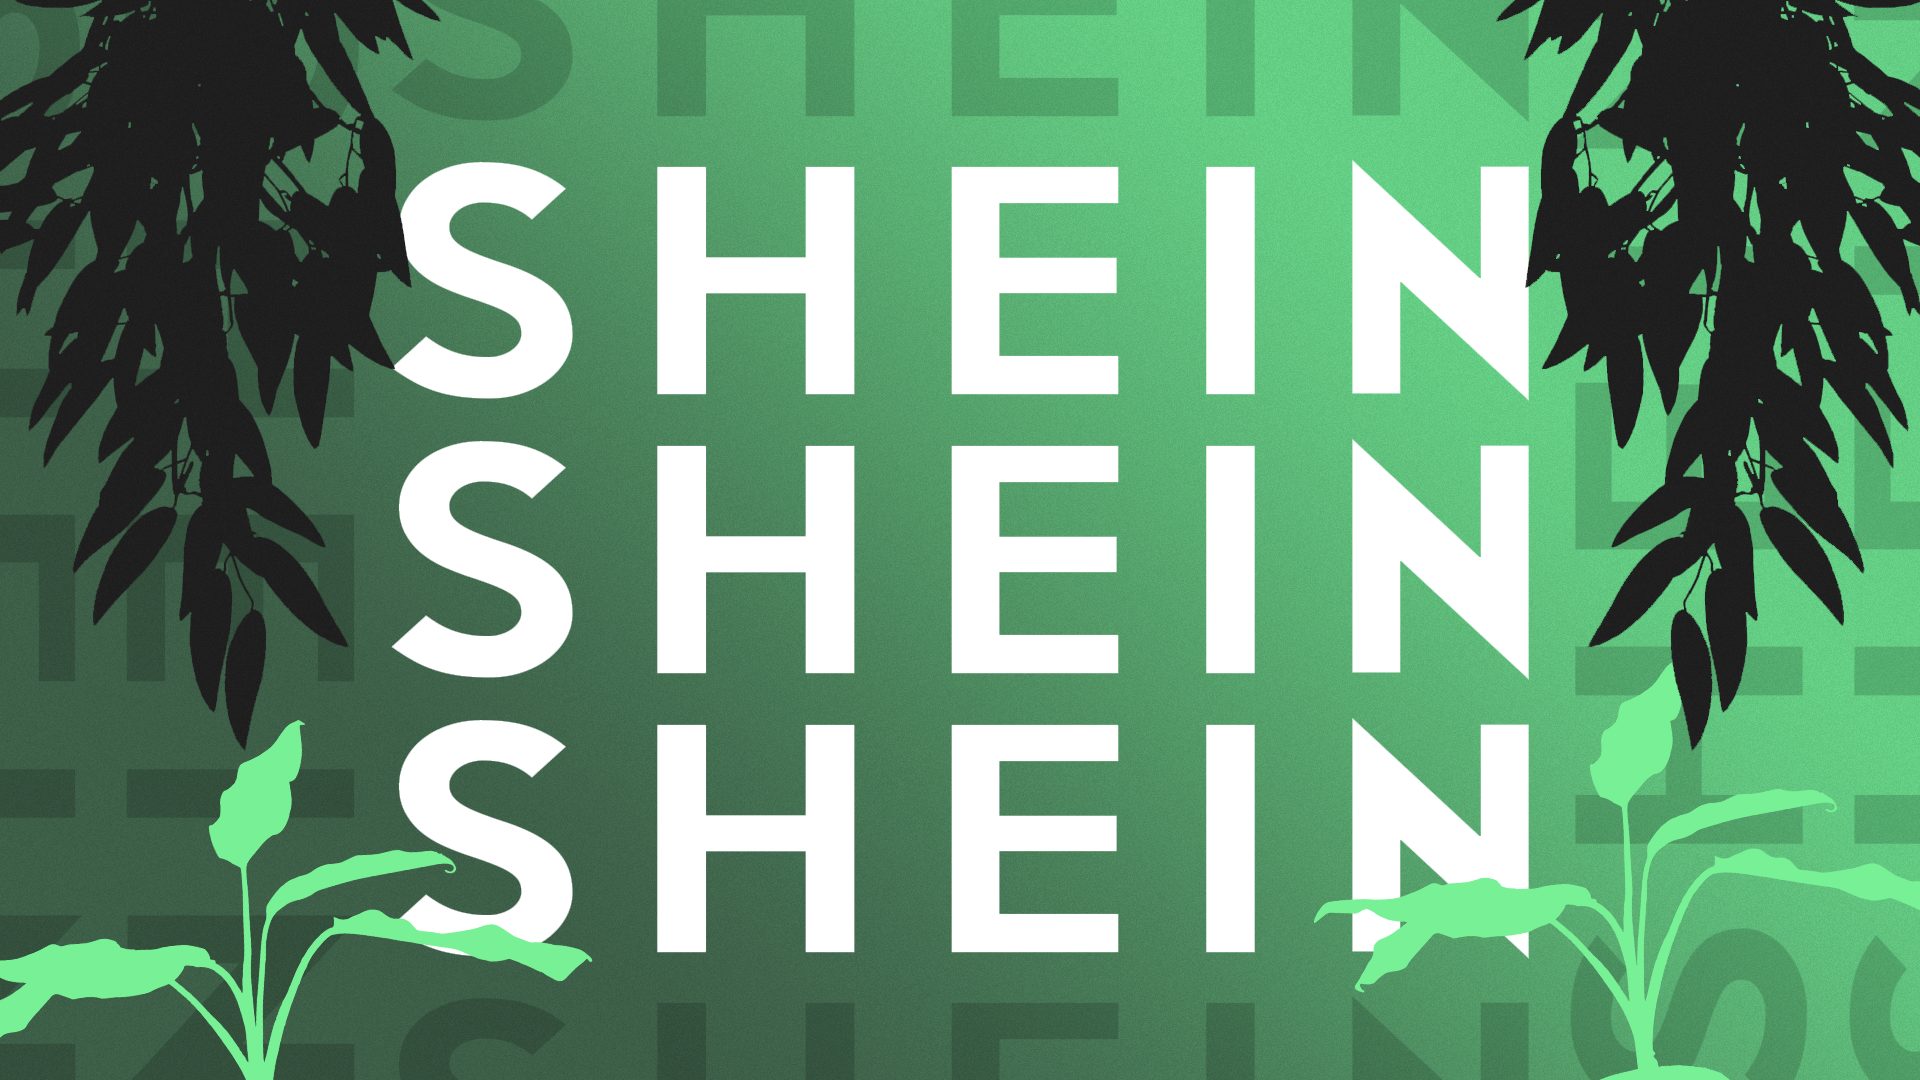 Fast fashion brand SHEIN appears to be greenwashing - Thred Website